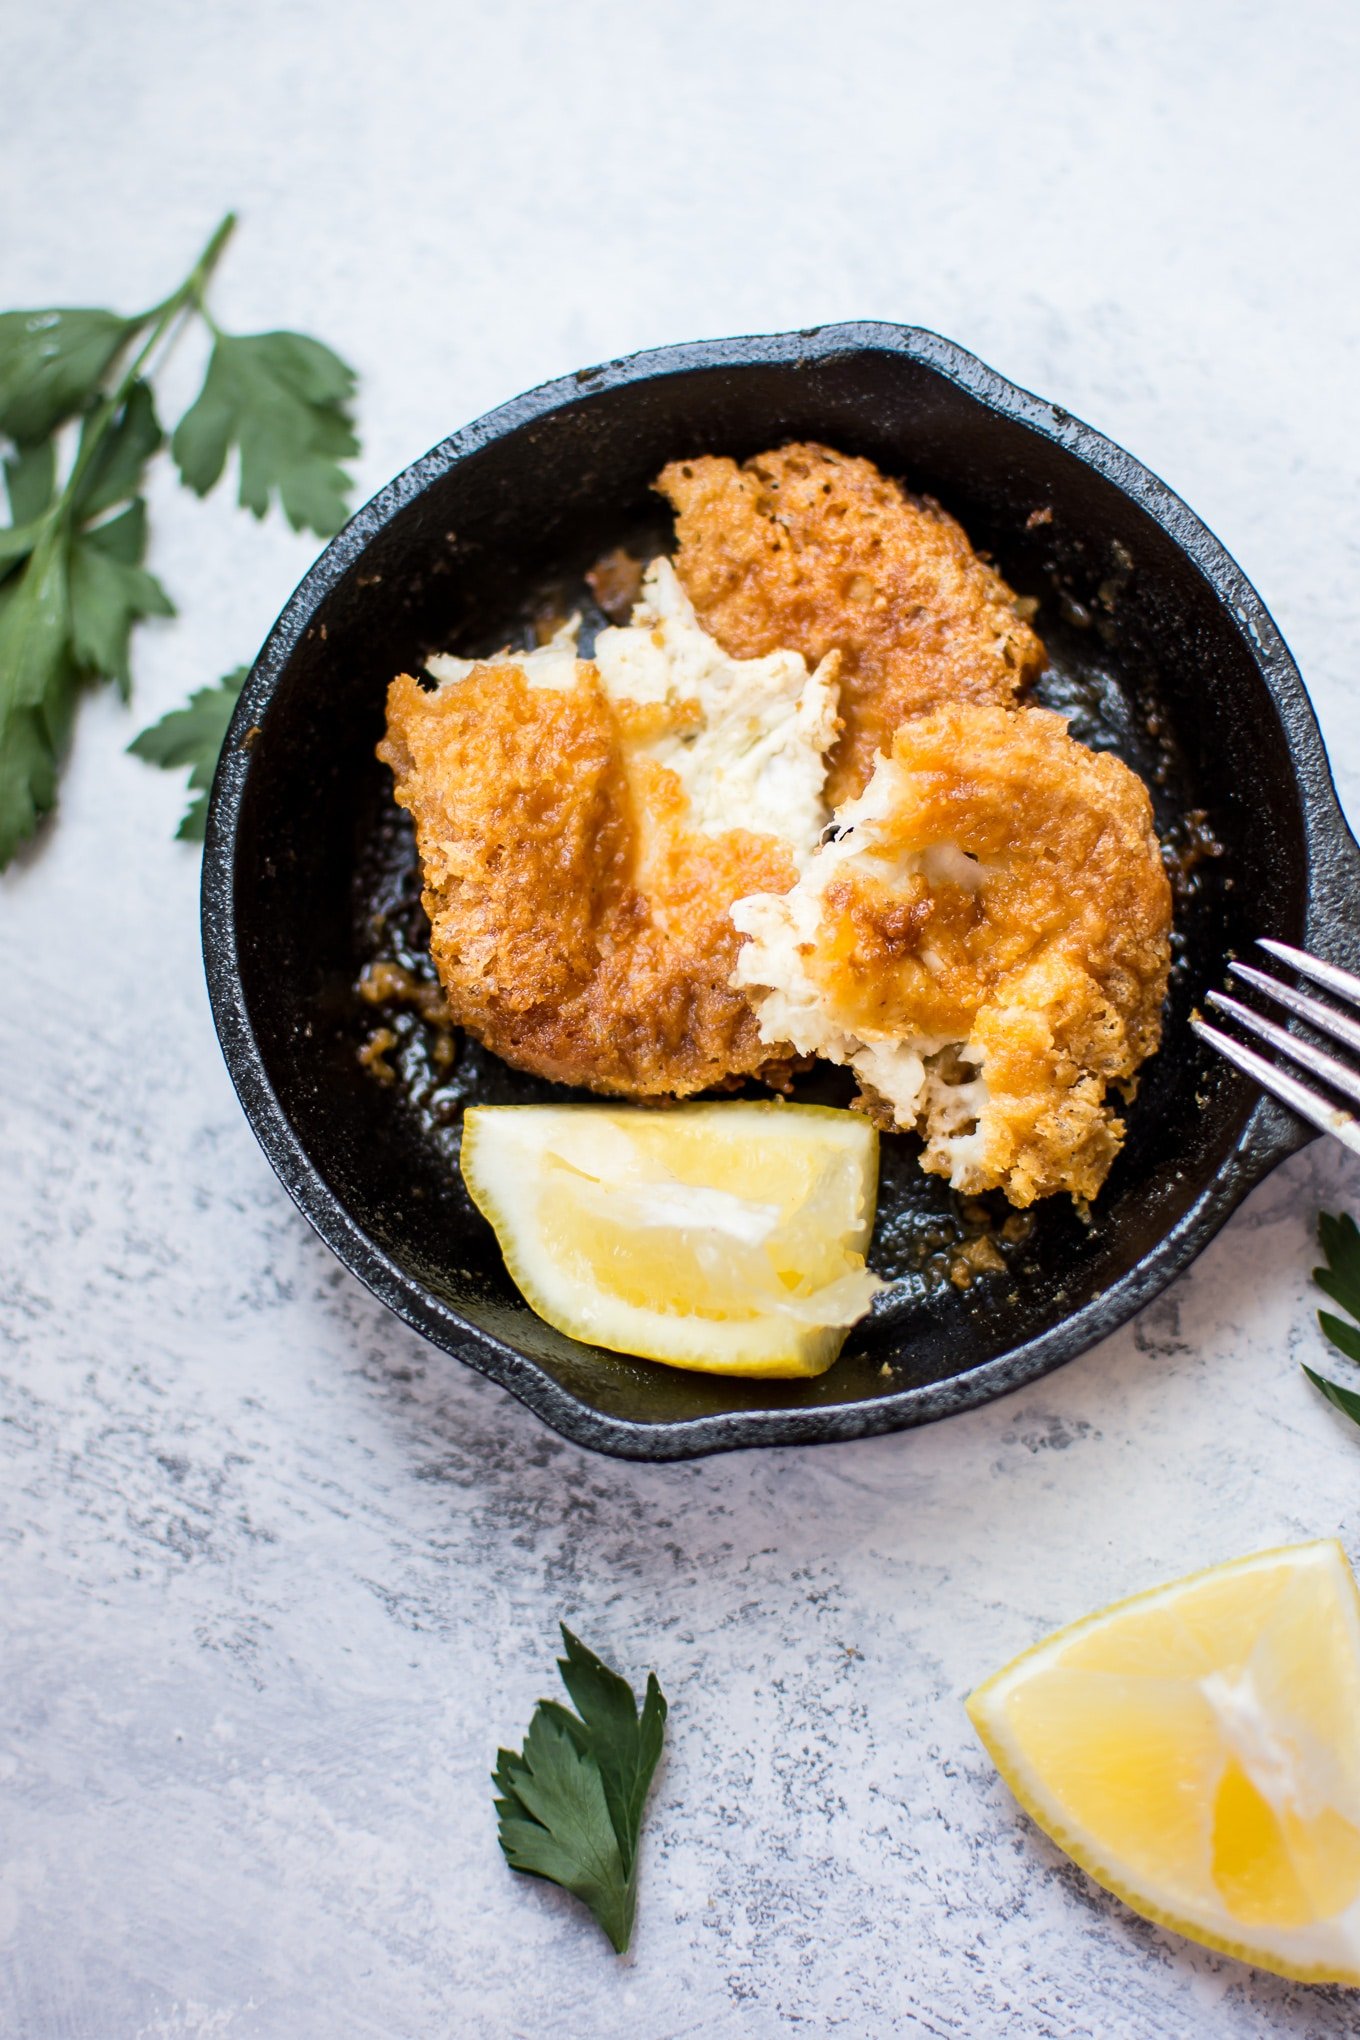 saganaki Greek fried melty cheese in a tiny skillet with a fork and lemon